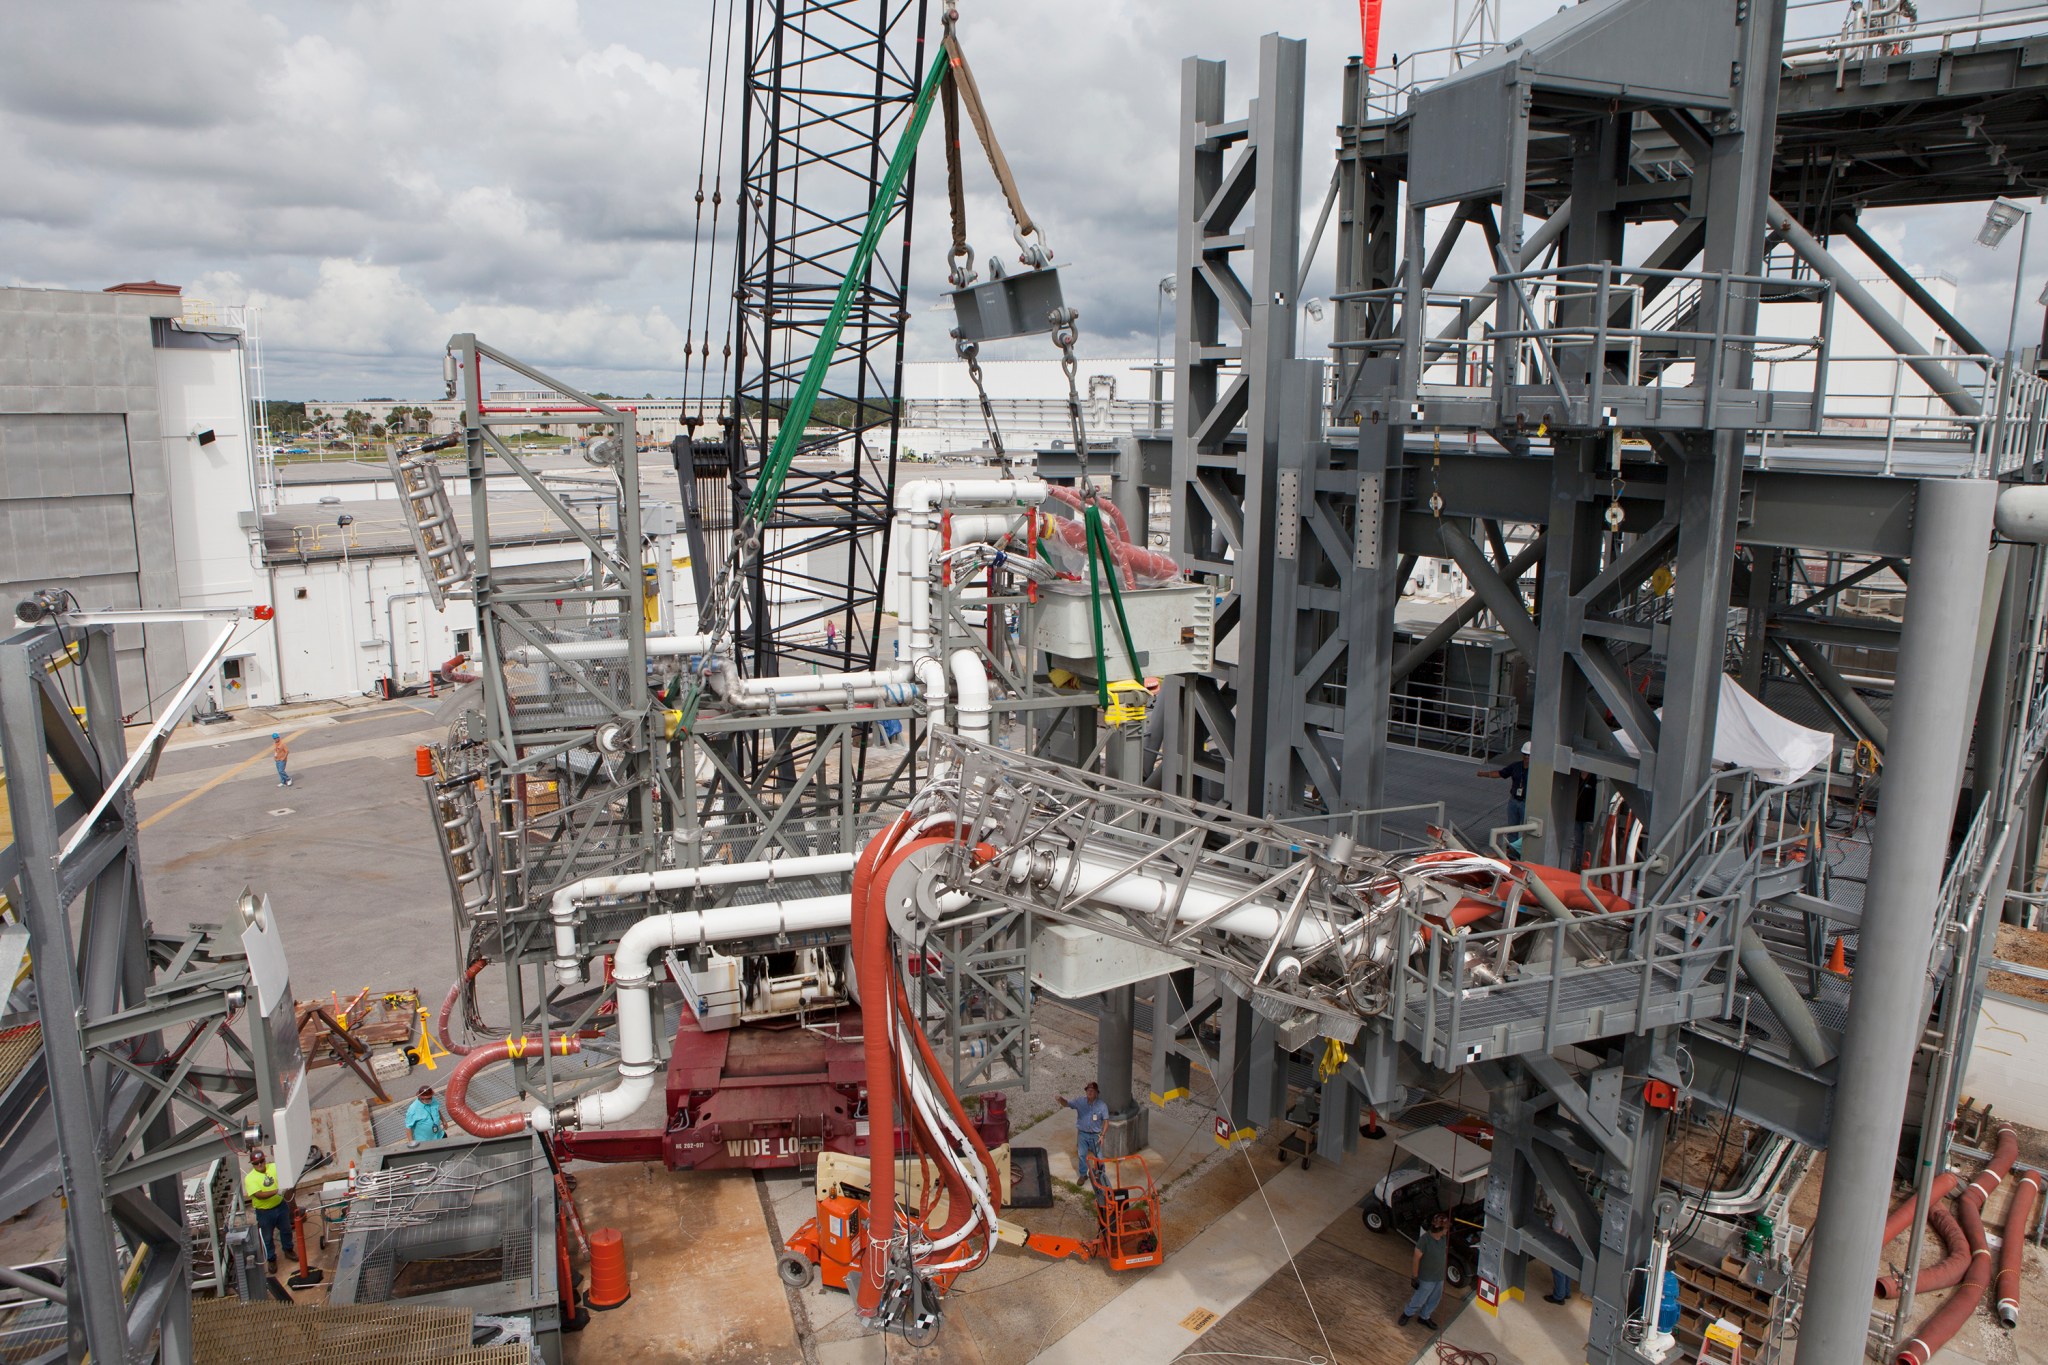 A view from above shows a heavy-lift crane attached to the Interim Cryogenic Propulsion Stage Umbilical at the LETF.